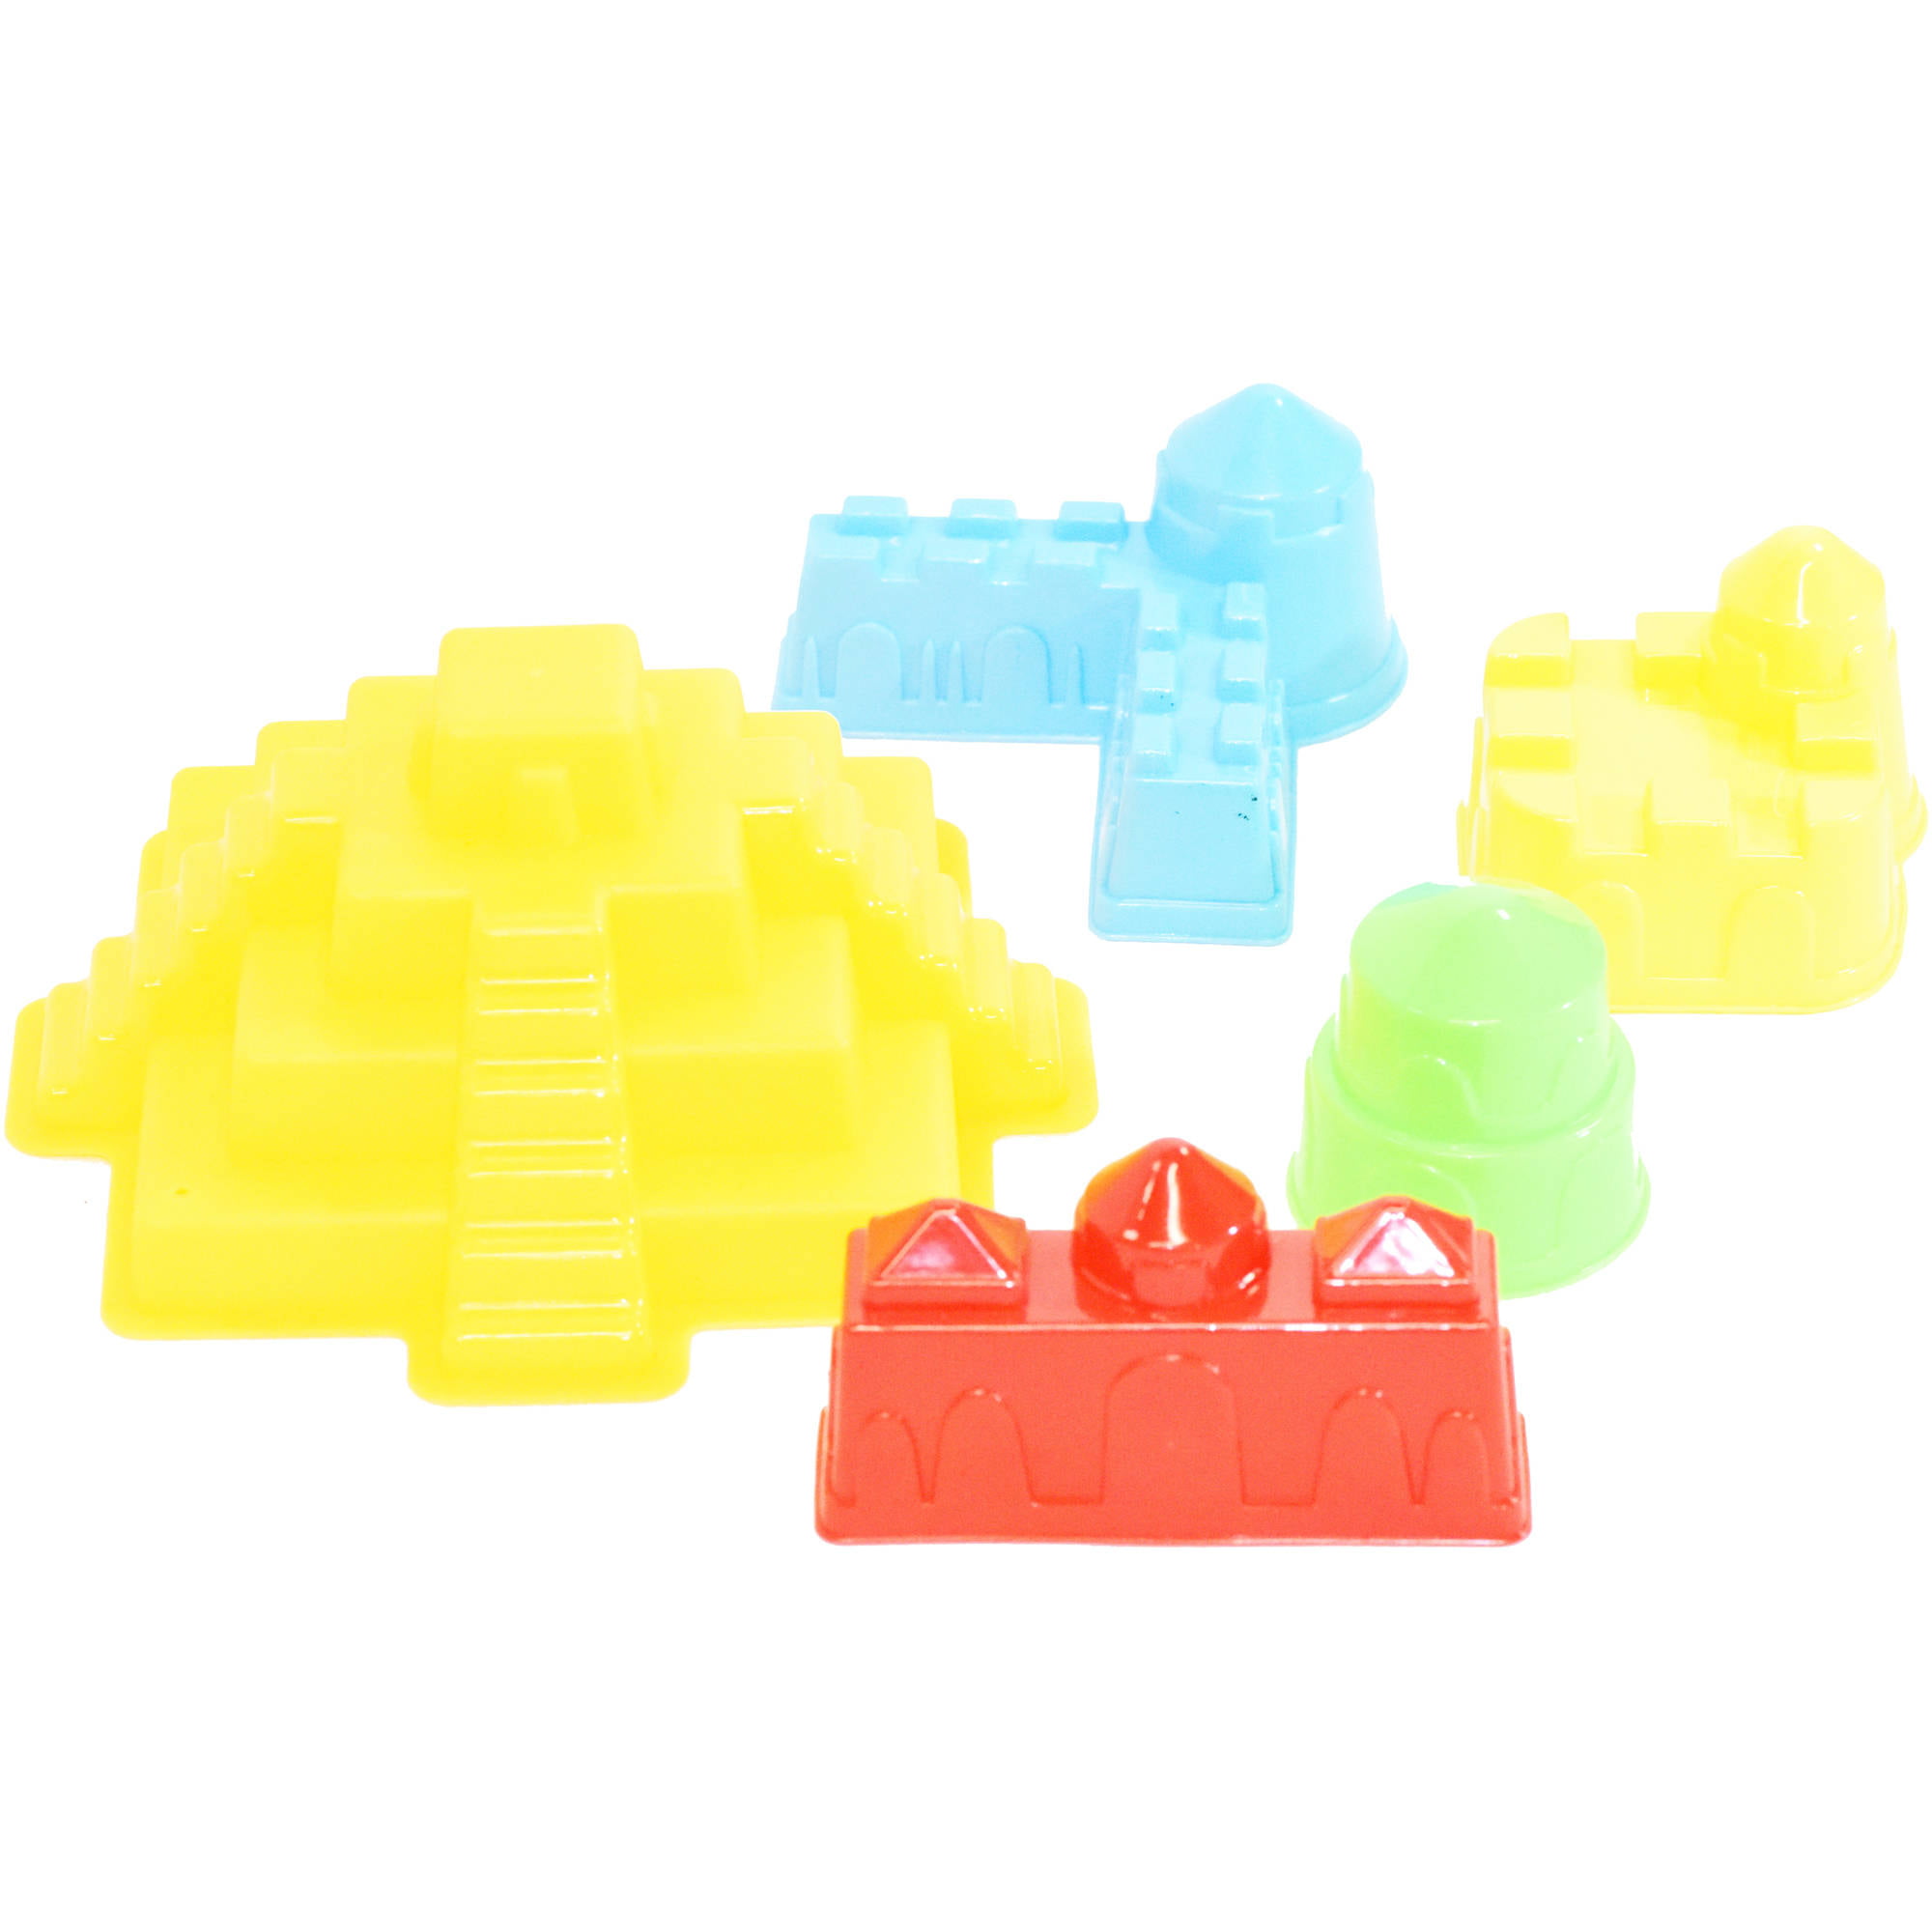 Watering Can Dessert Sand Molds for Toddlers Boys and Girls Sand Castle Building Kits 29 Pcs Outdoor Tools with Buckets Mesh Bag Lehoo Castle Kids Beach Sand Toys Set 